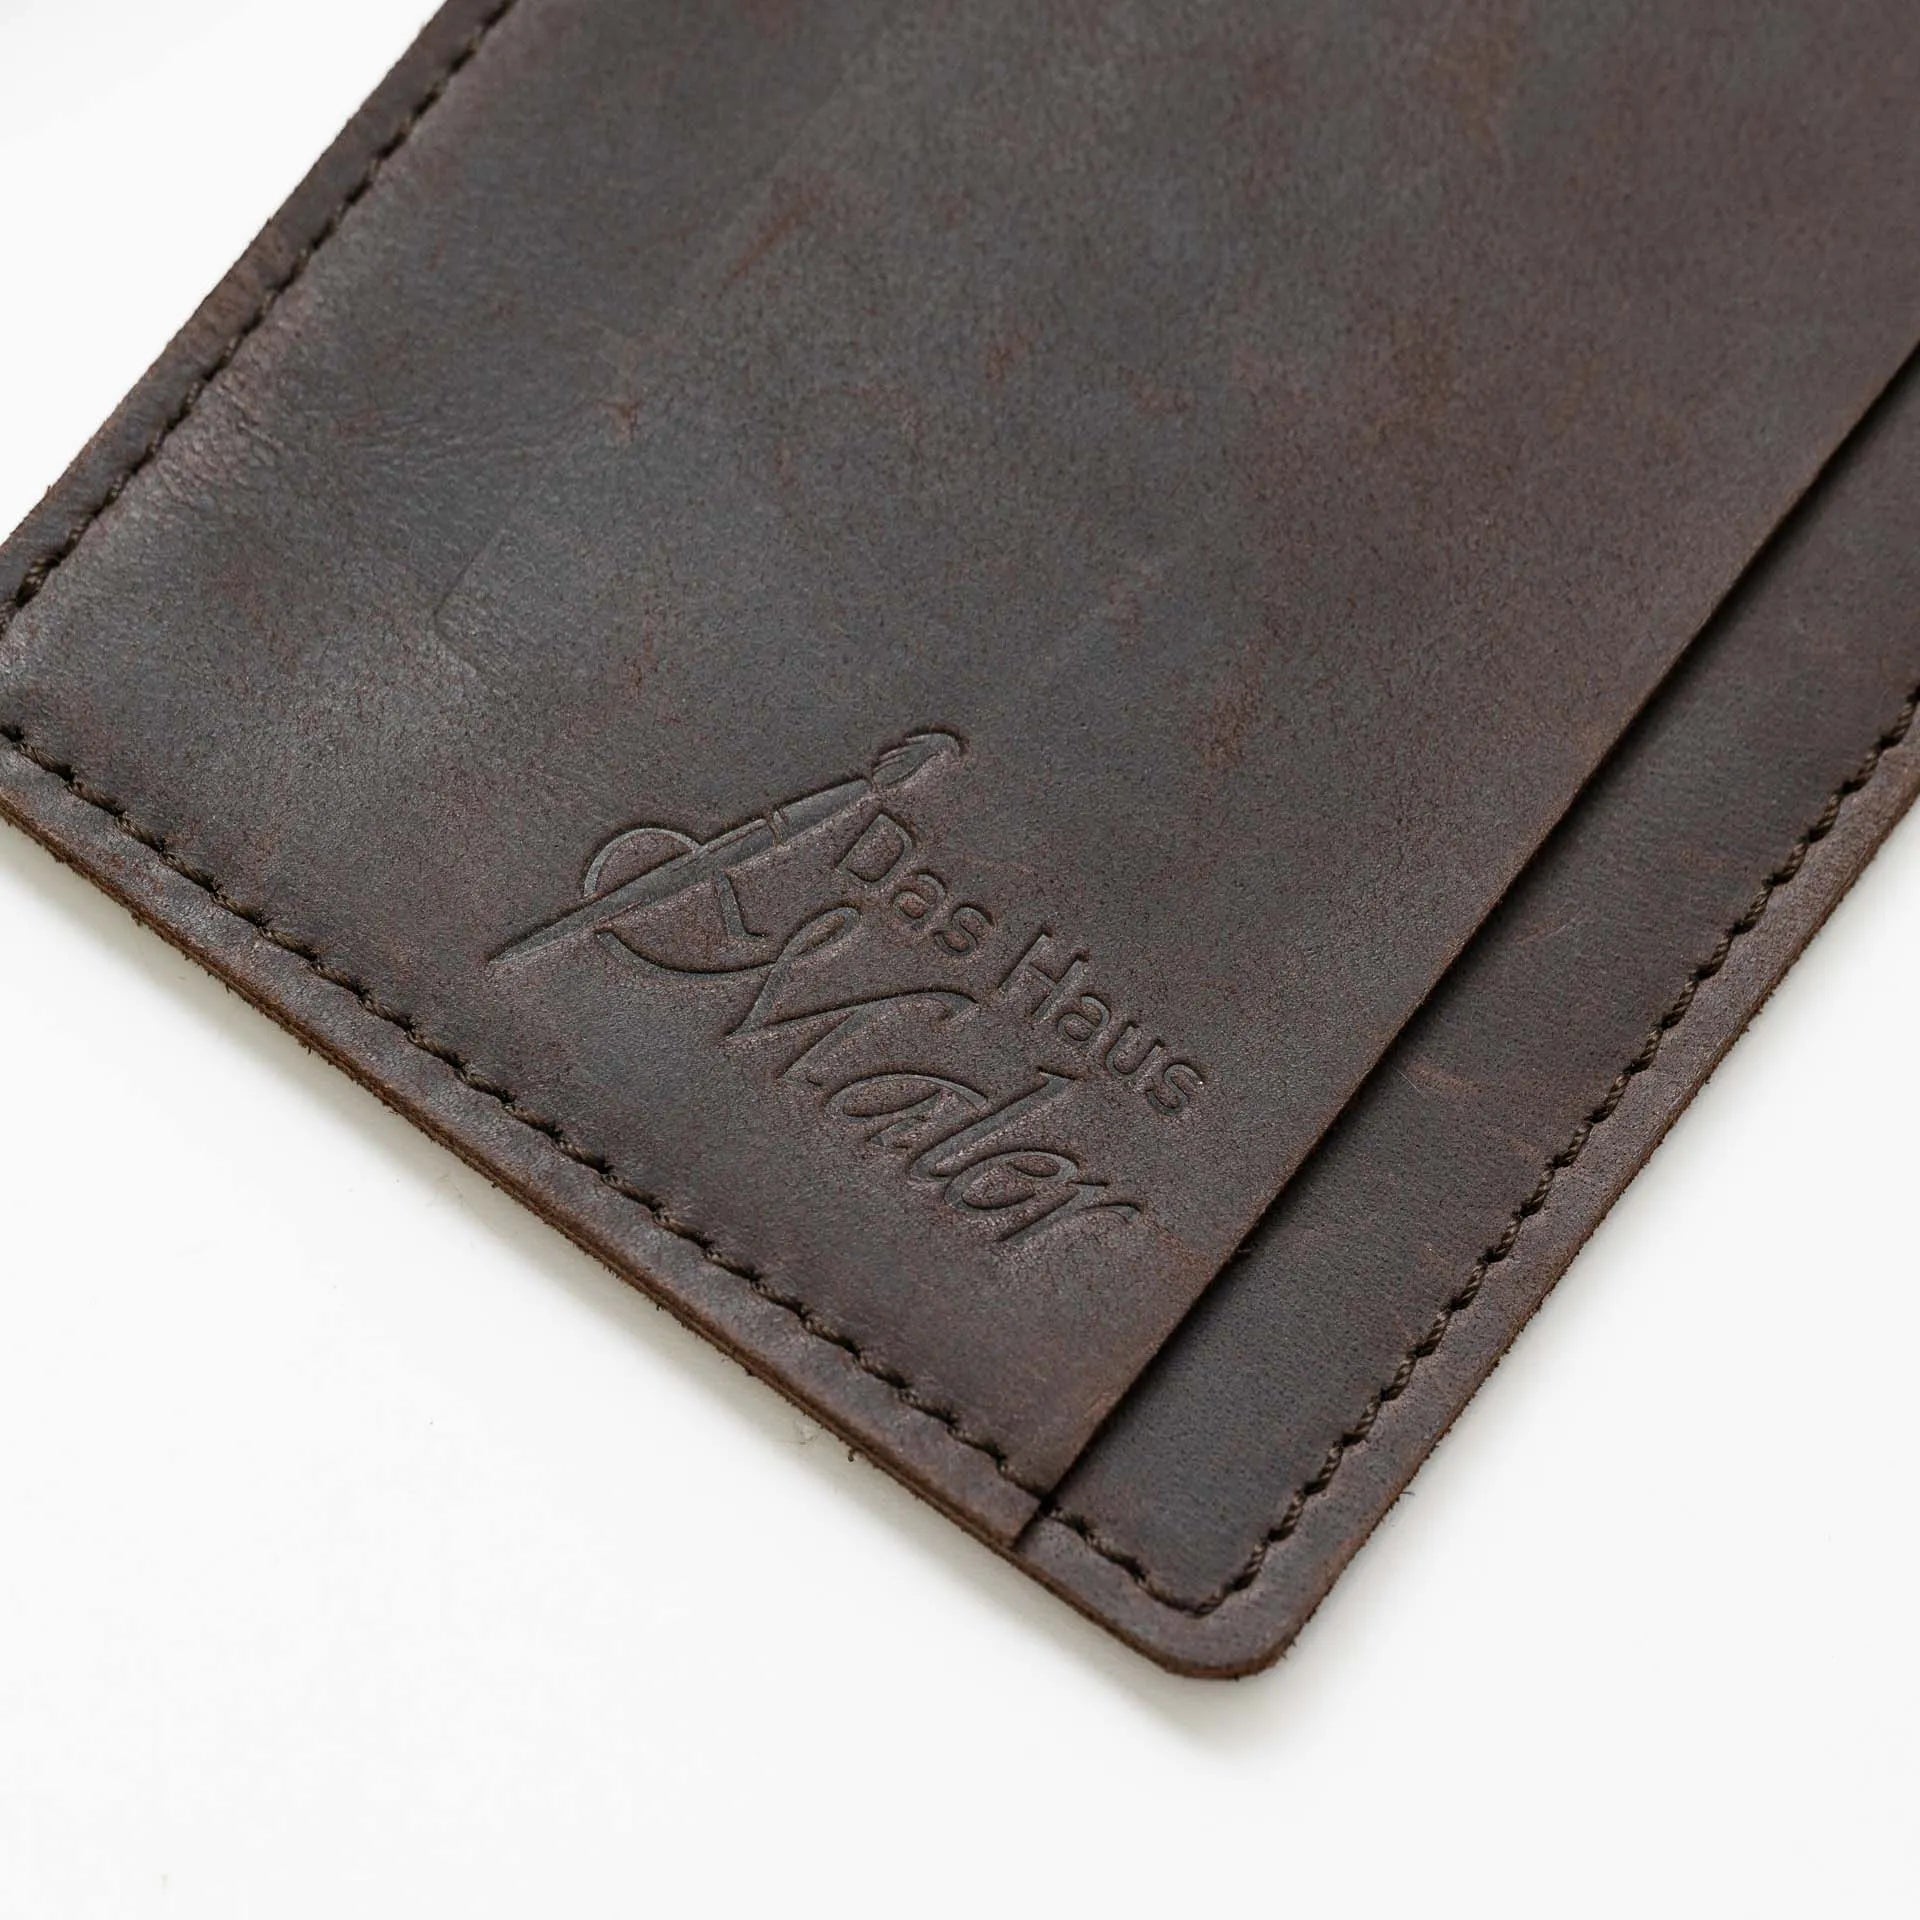 Luxurious Leather Receipt Holder: Ensure a premium experience with an embossed leather receipt holder.